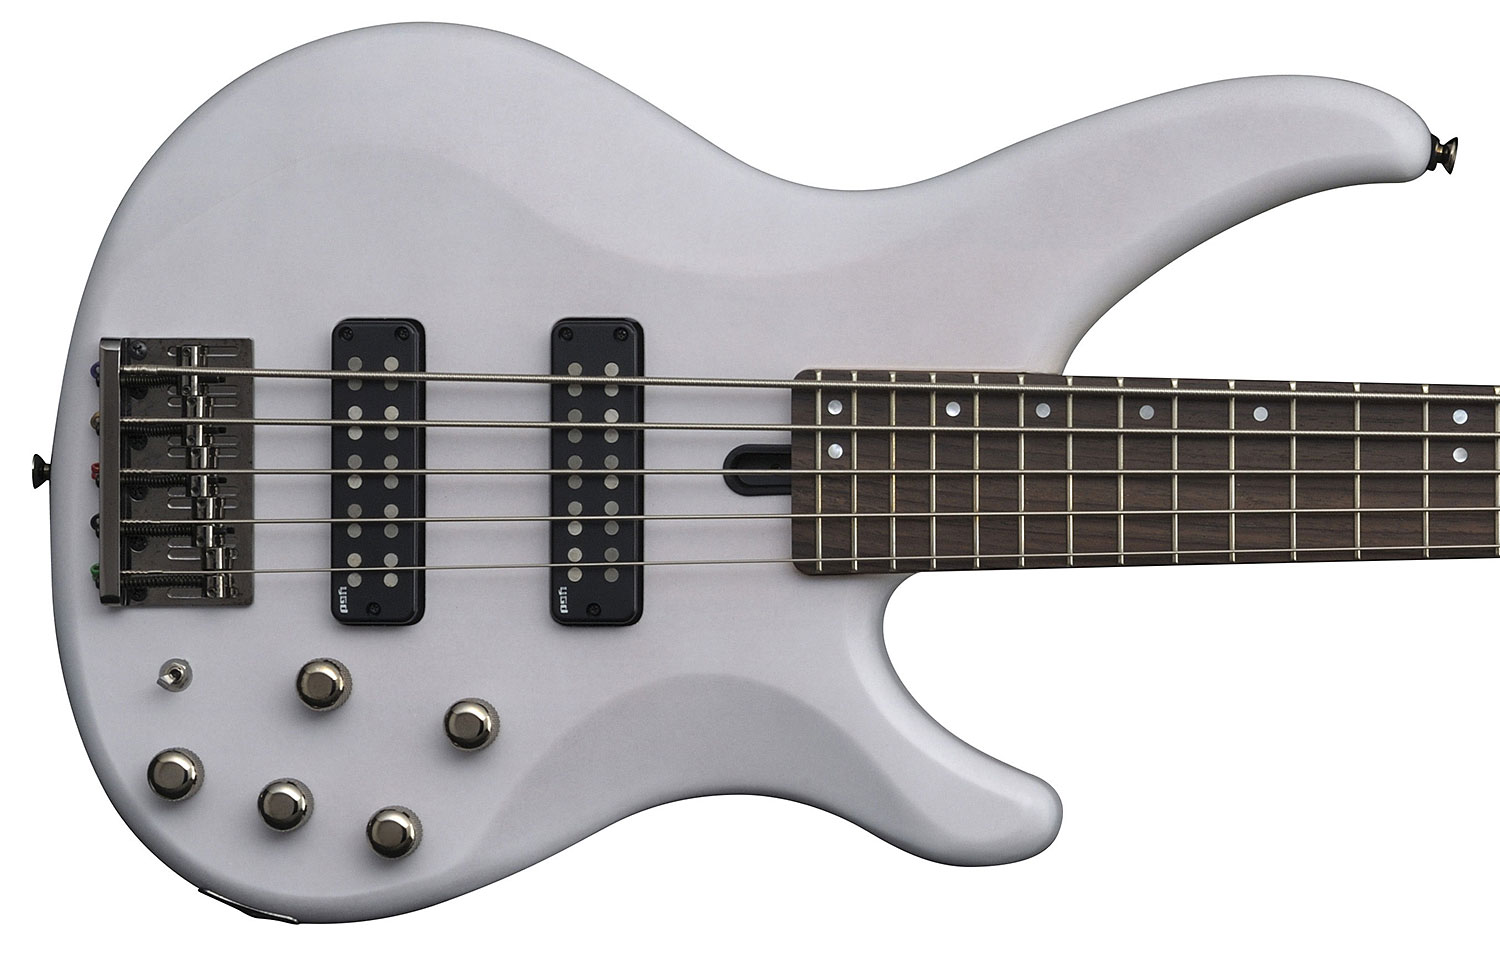 Yamaha Trbx505 Twh - Translucent White - Solid body electric bass - Variation 2